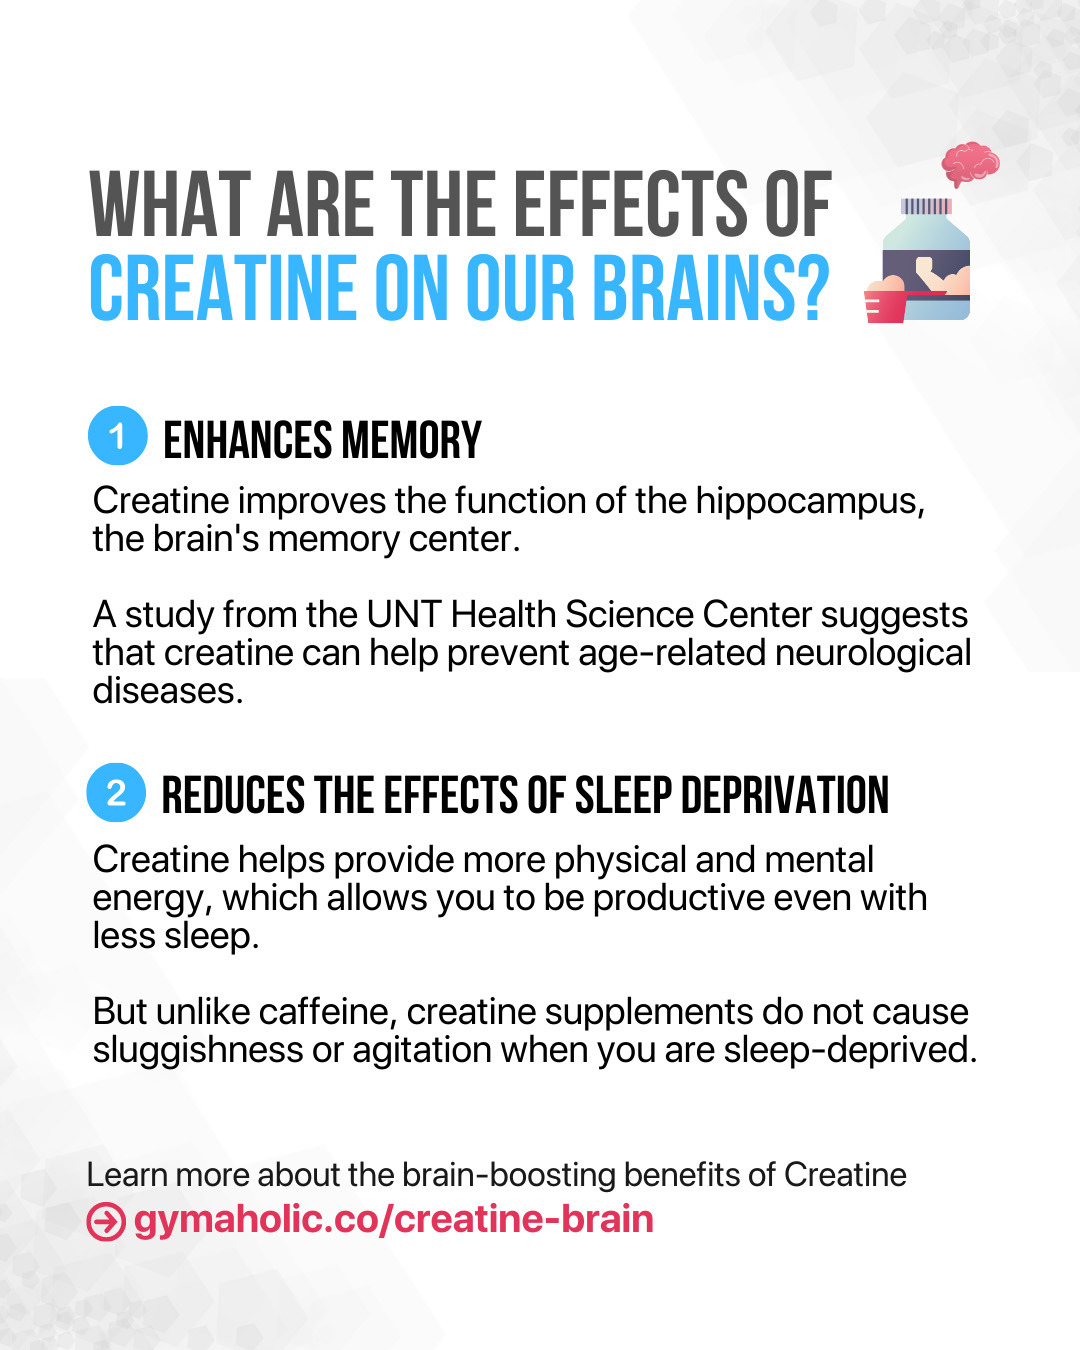 What Are the Effects of Creatine on Our Brains?